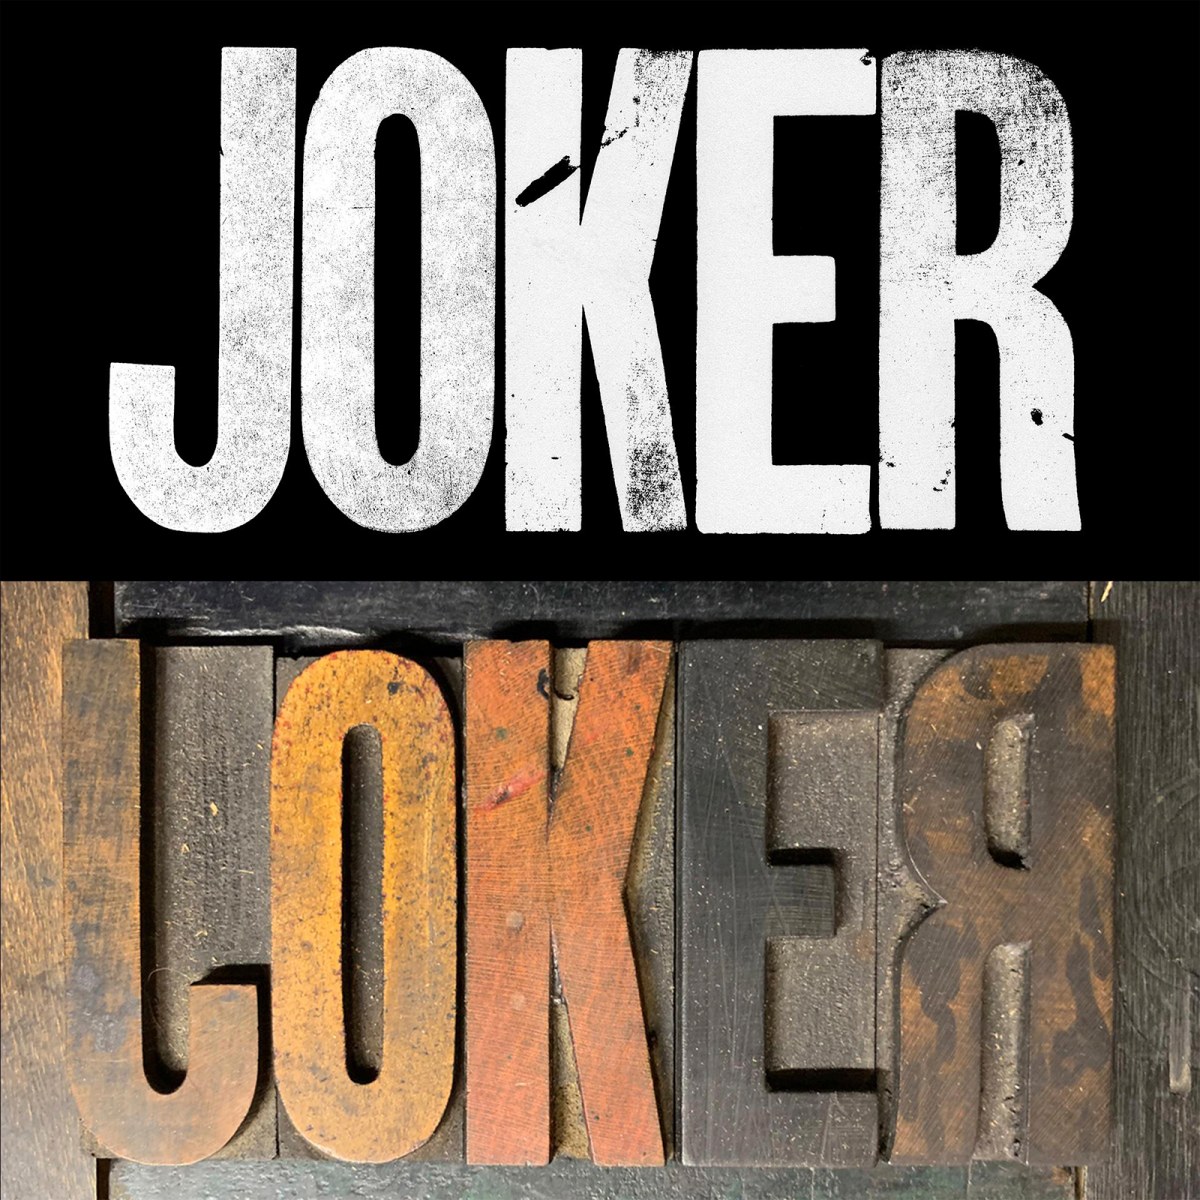 The Joker Controversy: Why the Military Has Issued Warnings About Film